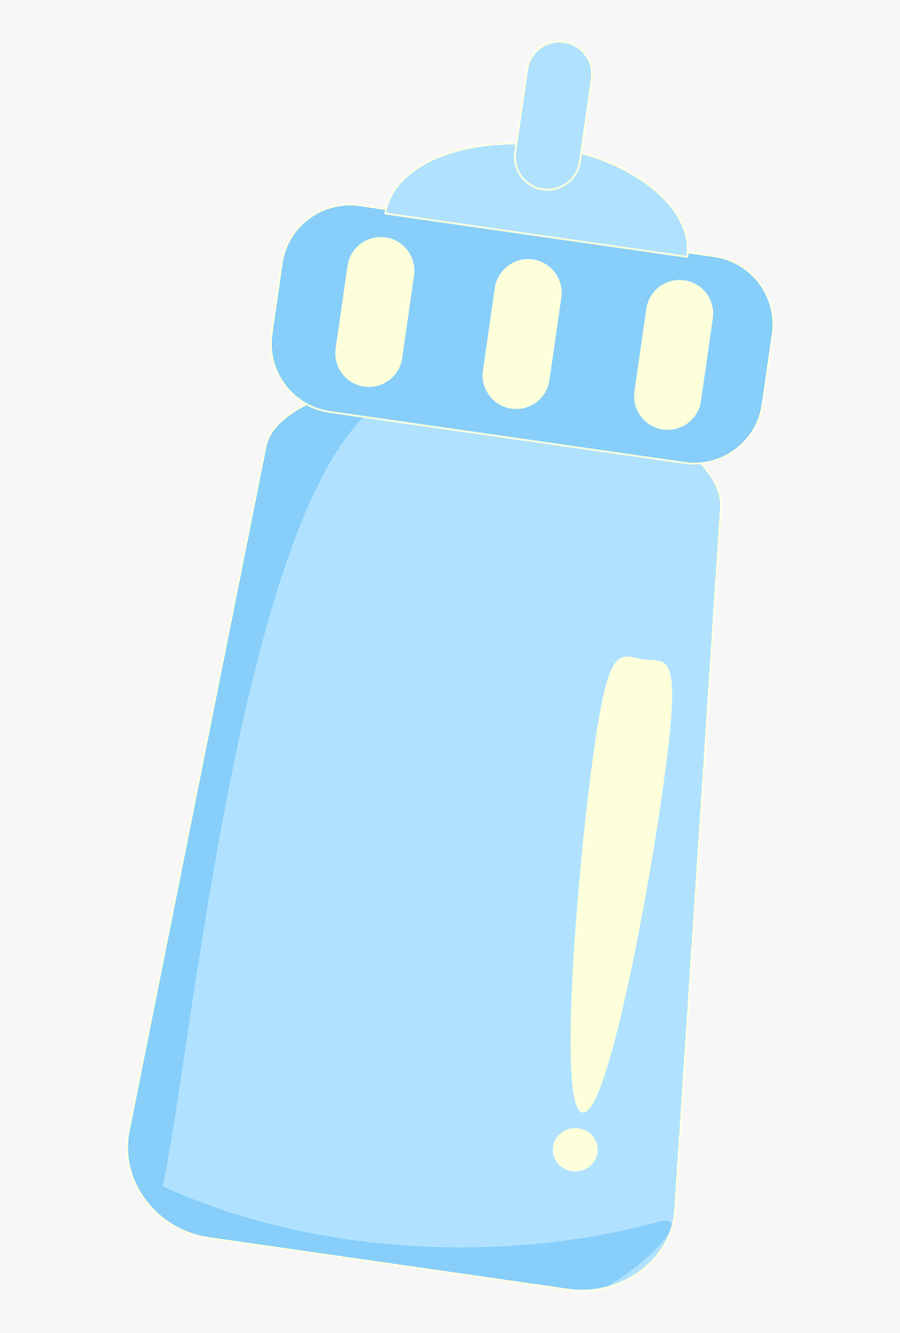 Minus Say Hello Free - Blue Baby Bottle Clipart, Transparent Clipart